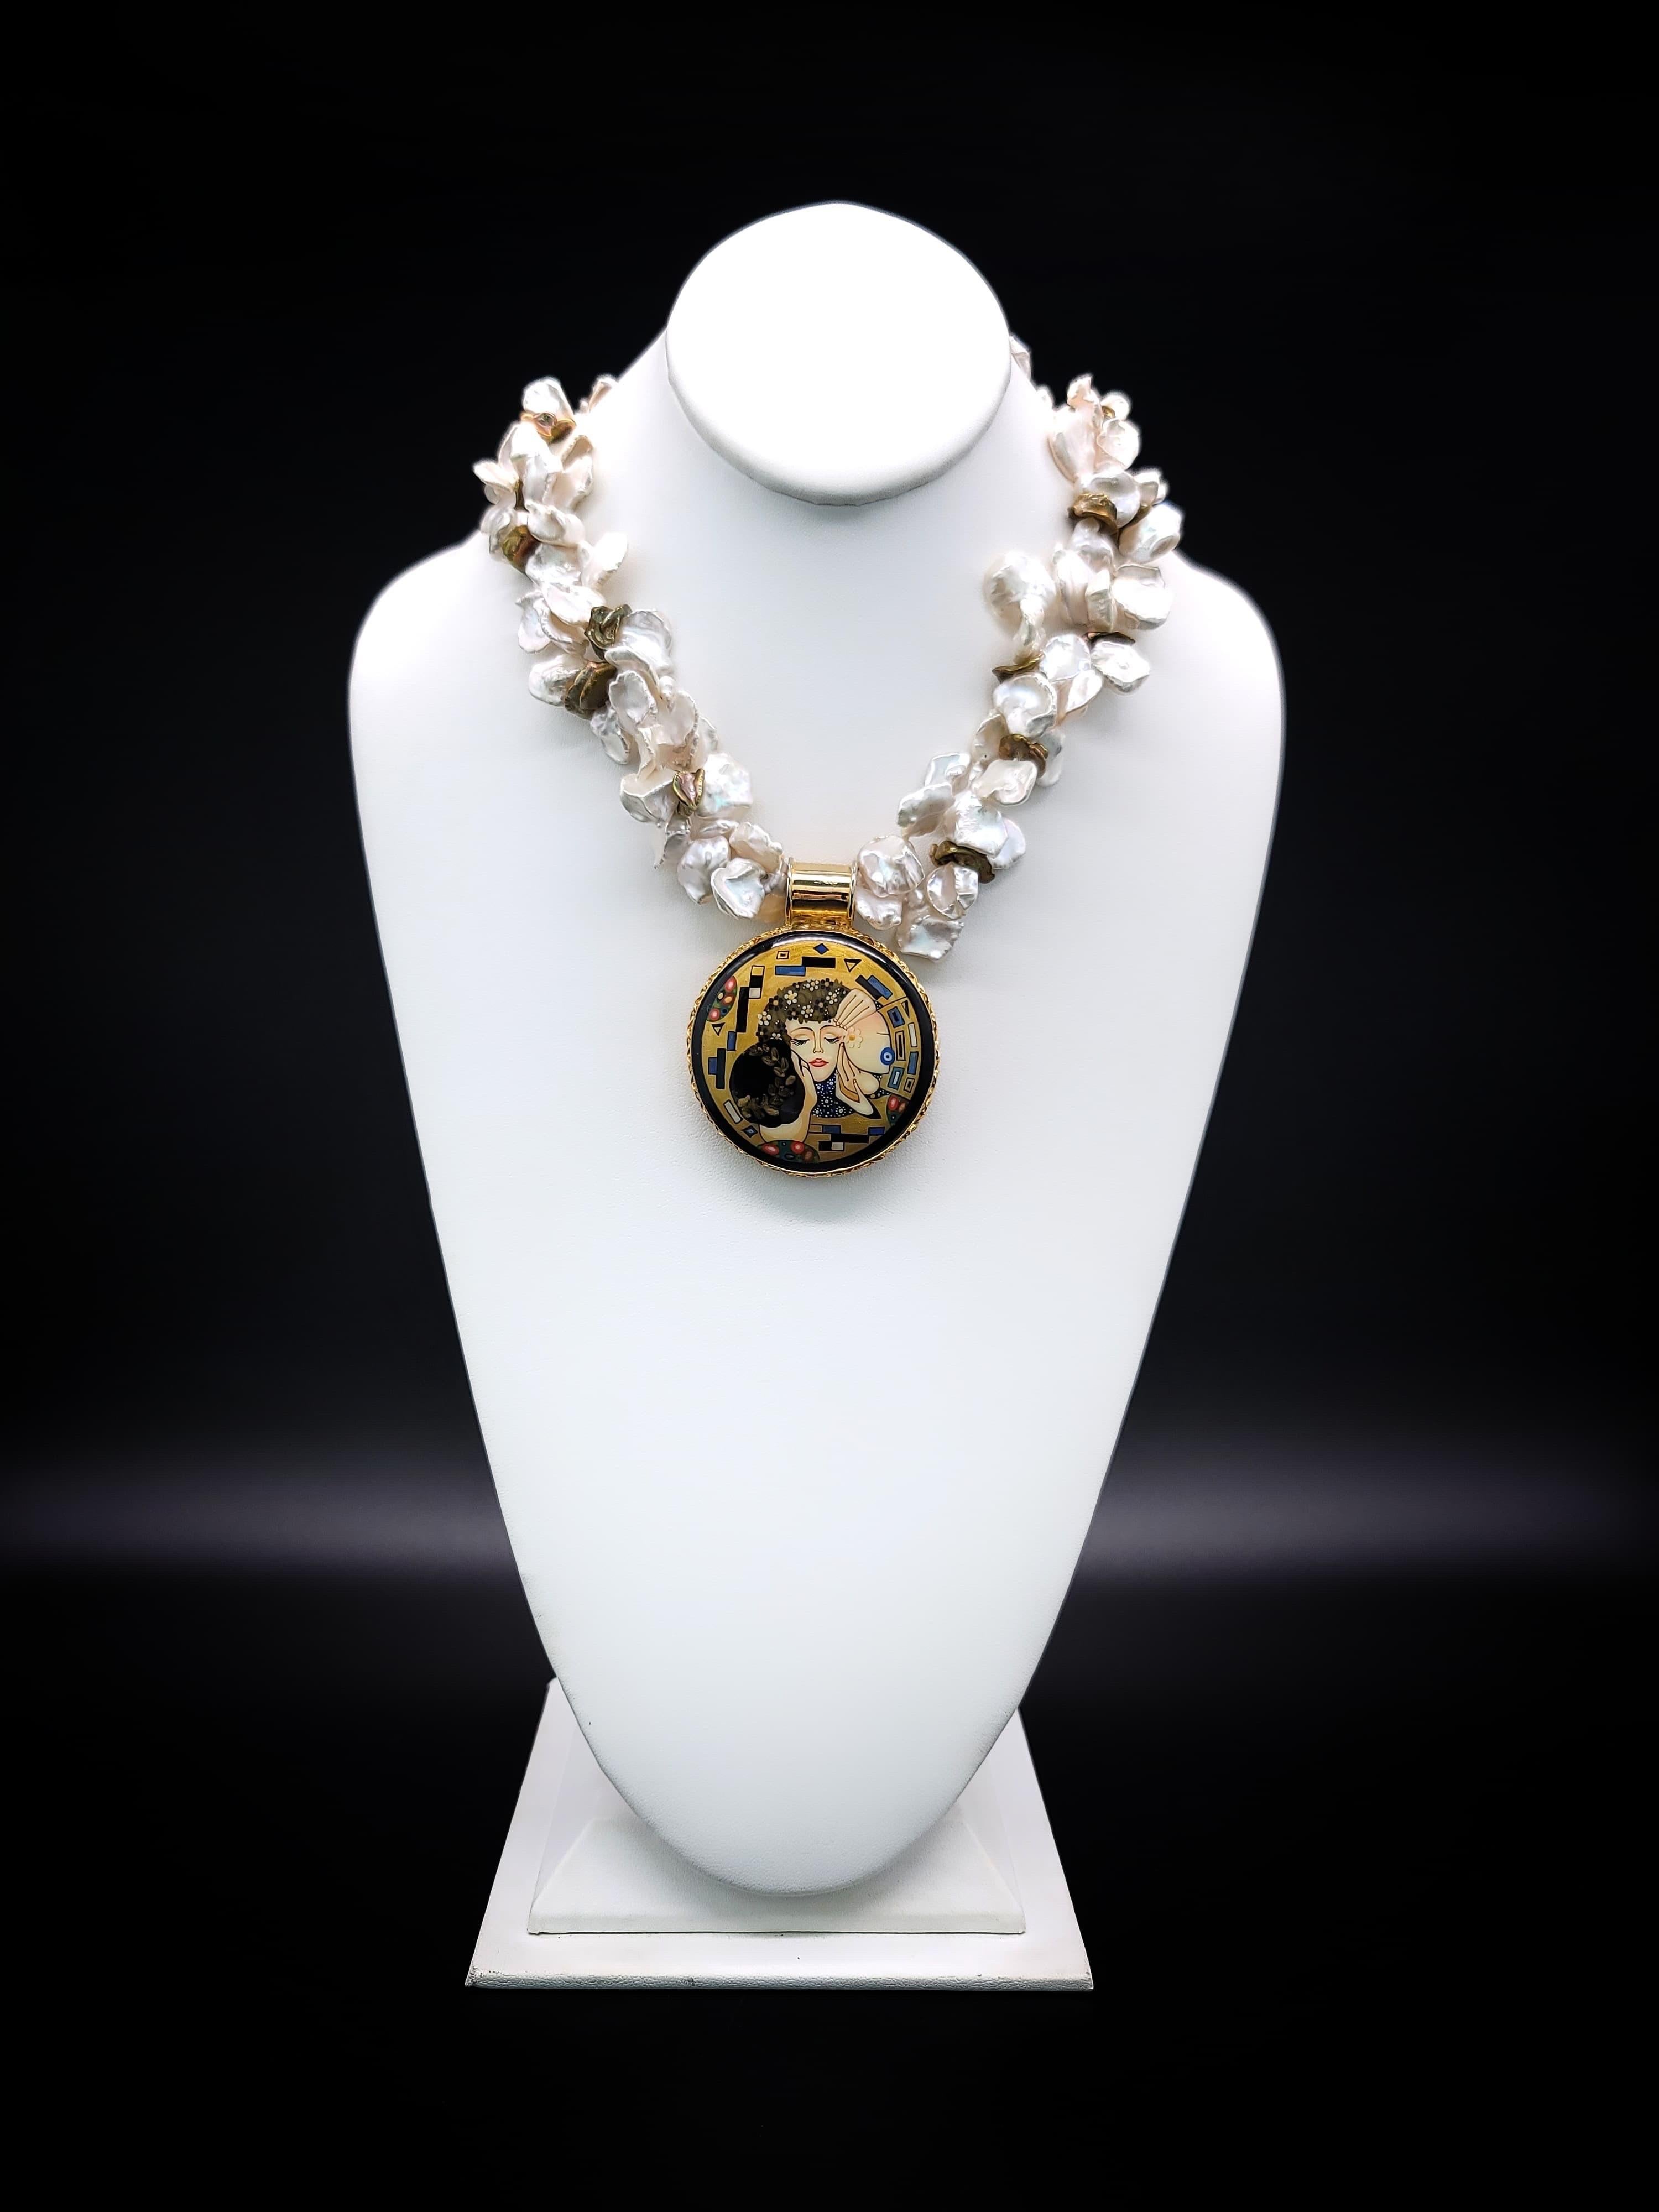 One-of-a-Kind 

Experience the enchanting allure of Art Deco with this stunning necklace, a magical creation born from the imagination of an art miniaturist who discovered an unforgettable image.

The iconic Gustav Klimt gold design is carefully